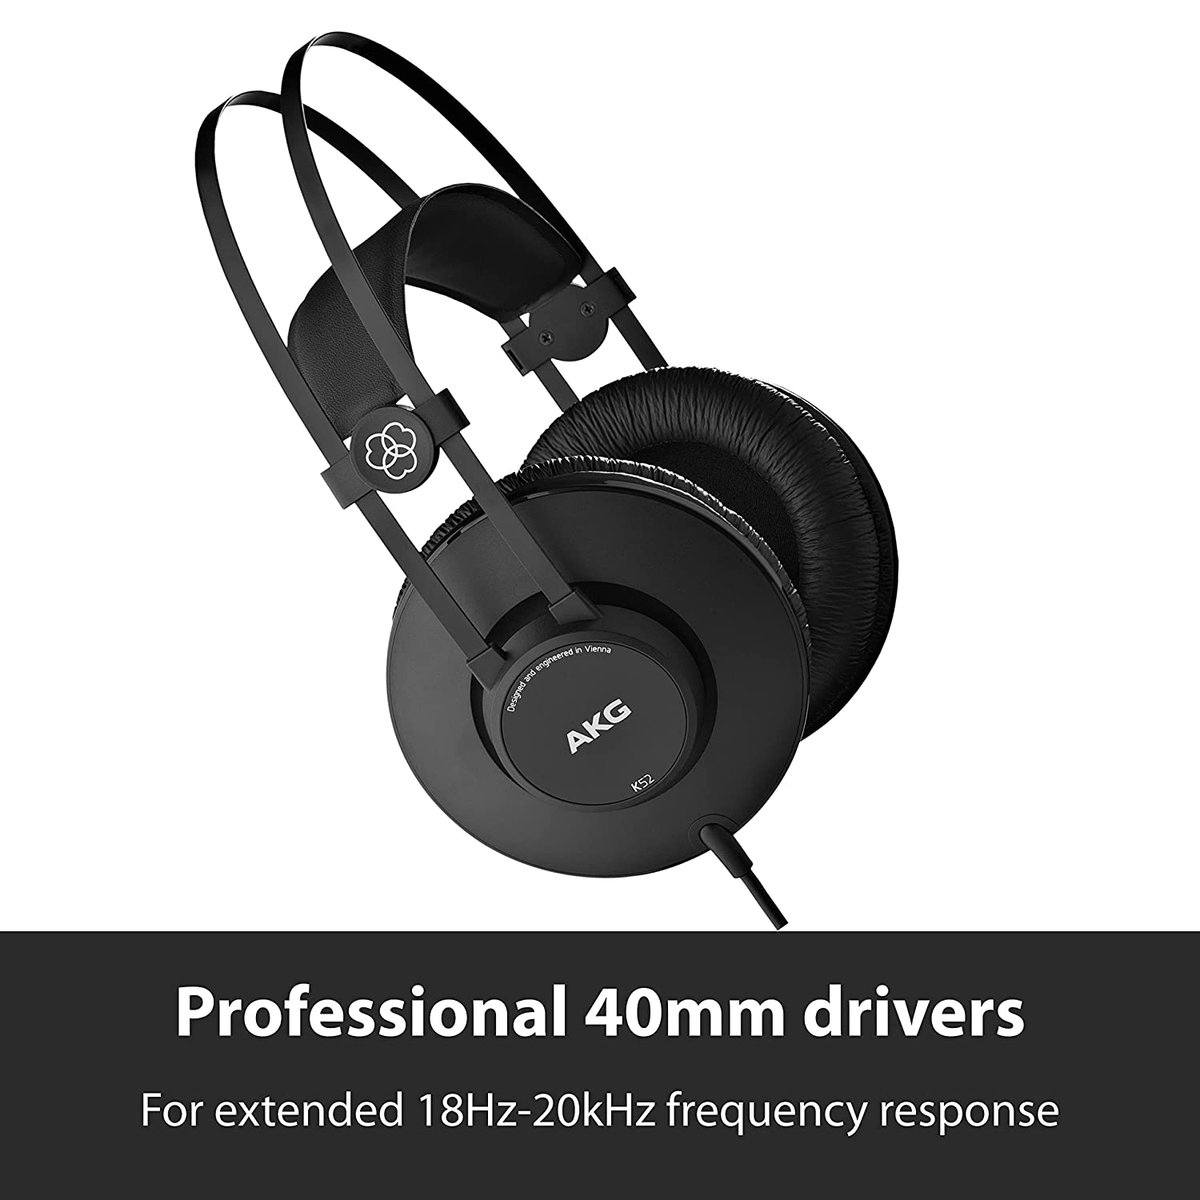 Rs 2,148 at 60% off on AKG K52 Wired Over Ear Headphones
Amazon Deal- amzn.to/3IemoC7

#amazondeal #deal #sale #discount #offer #headphones #earphones #earbuds #headset #studioheadphones #studio #music #gaming #singing #songs #tech #android #Iphone #windowspc #laptop